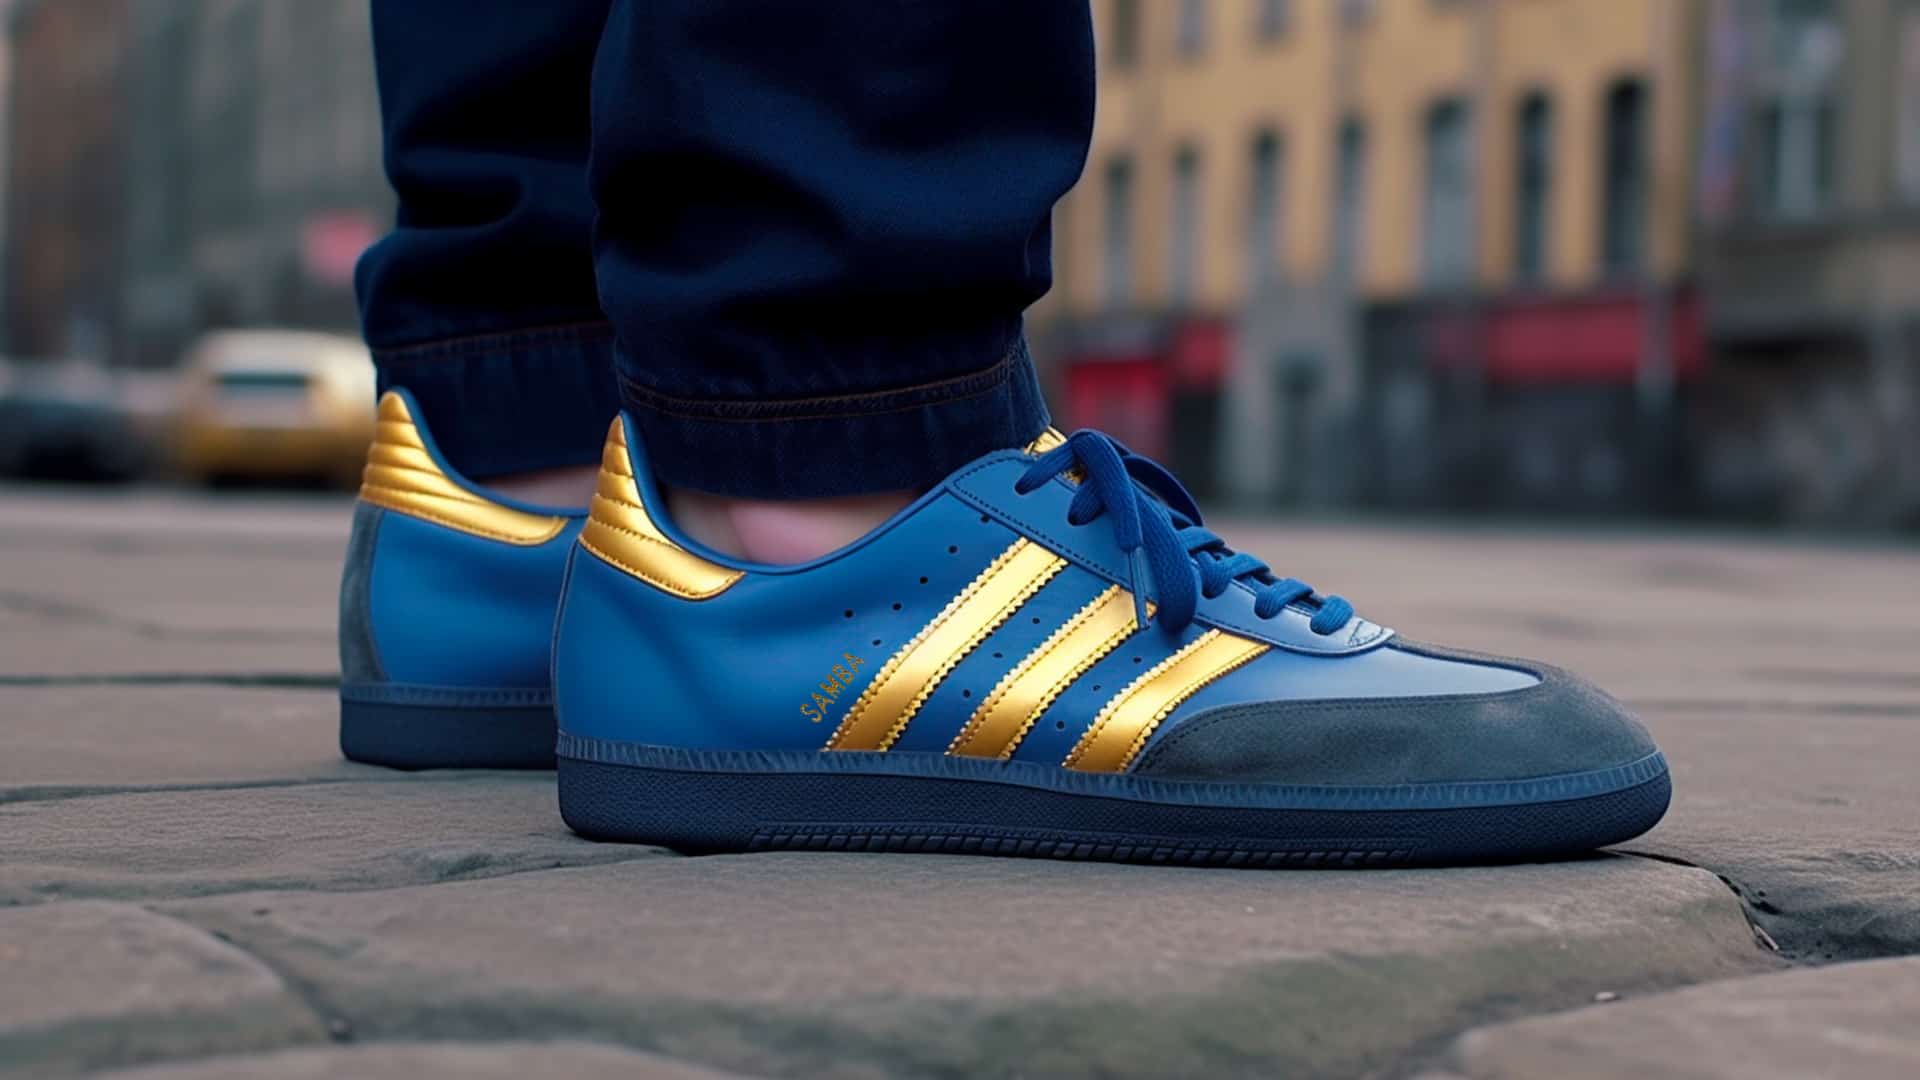 Mentor banco sequía The 9 Best adidas Samba Sneakers To Buy in 2023 - Sneaker Fortress